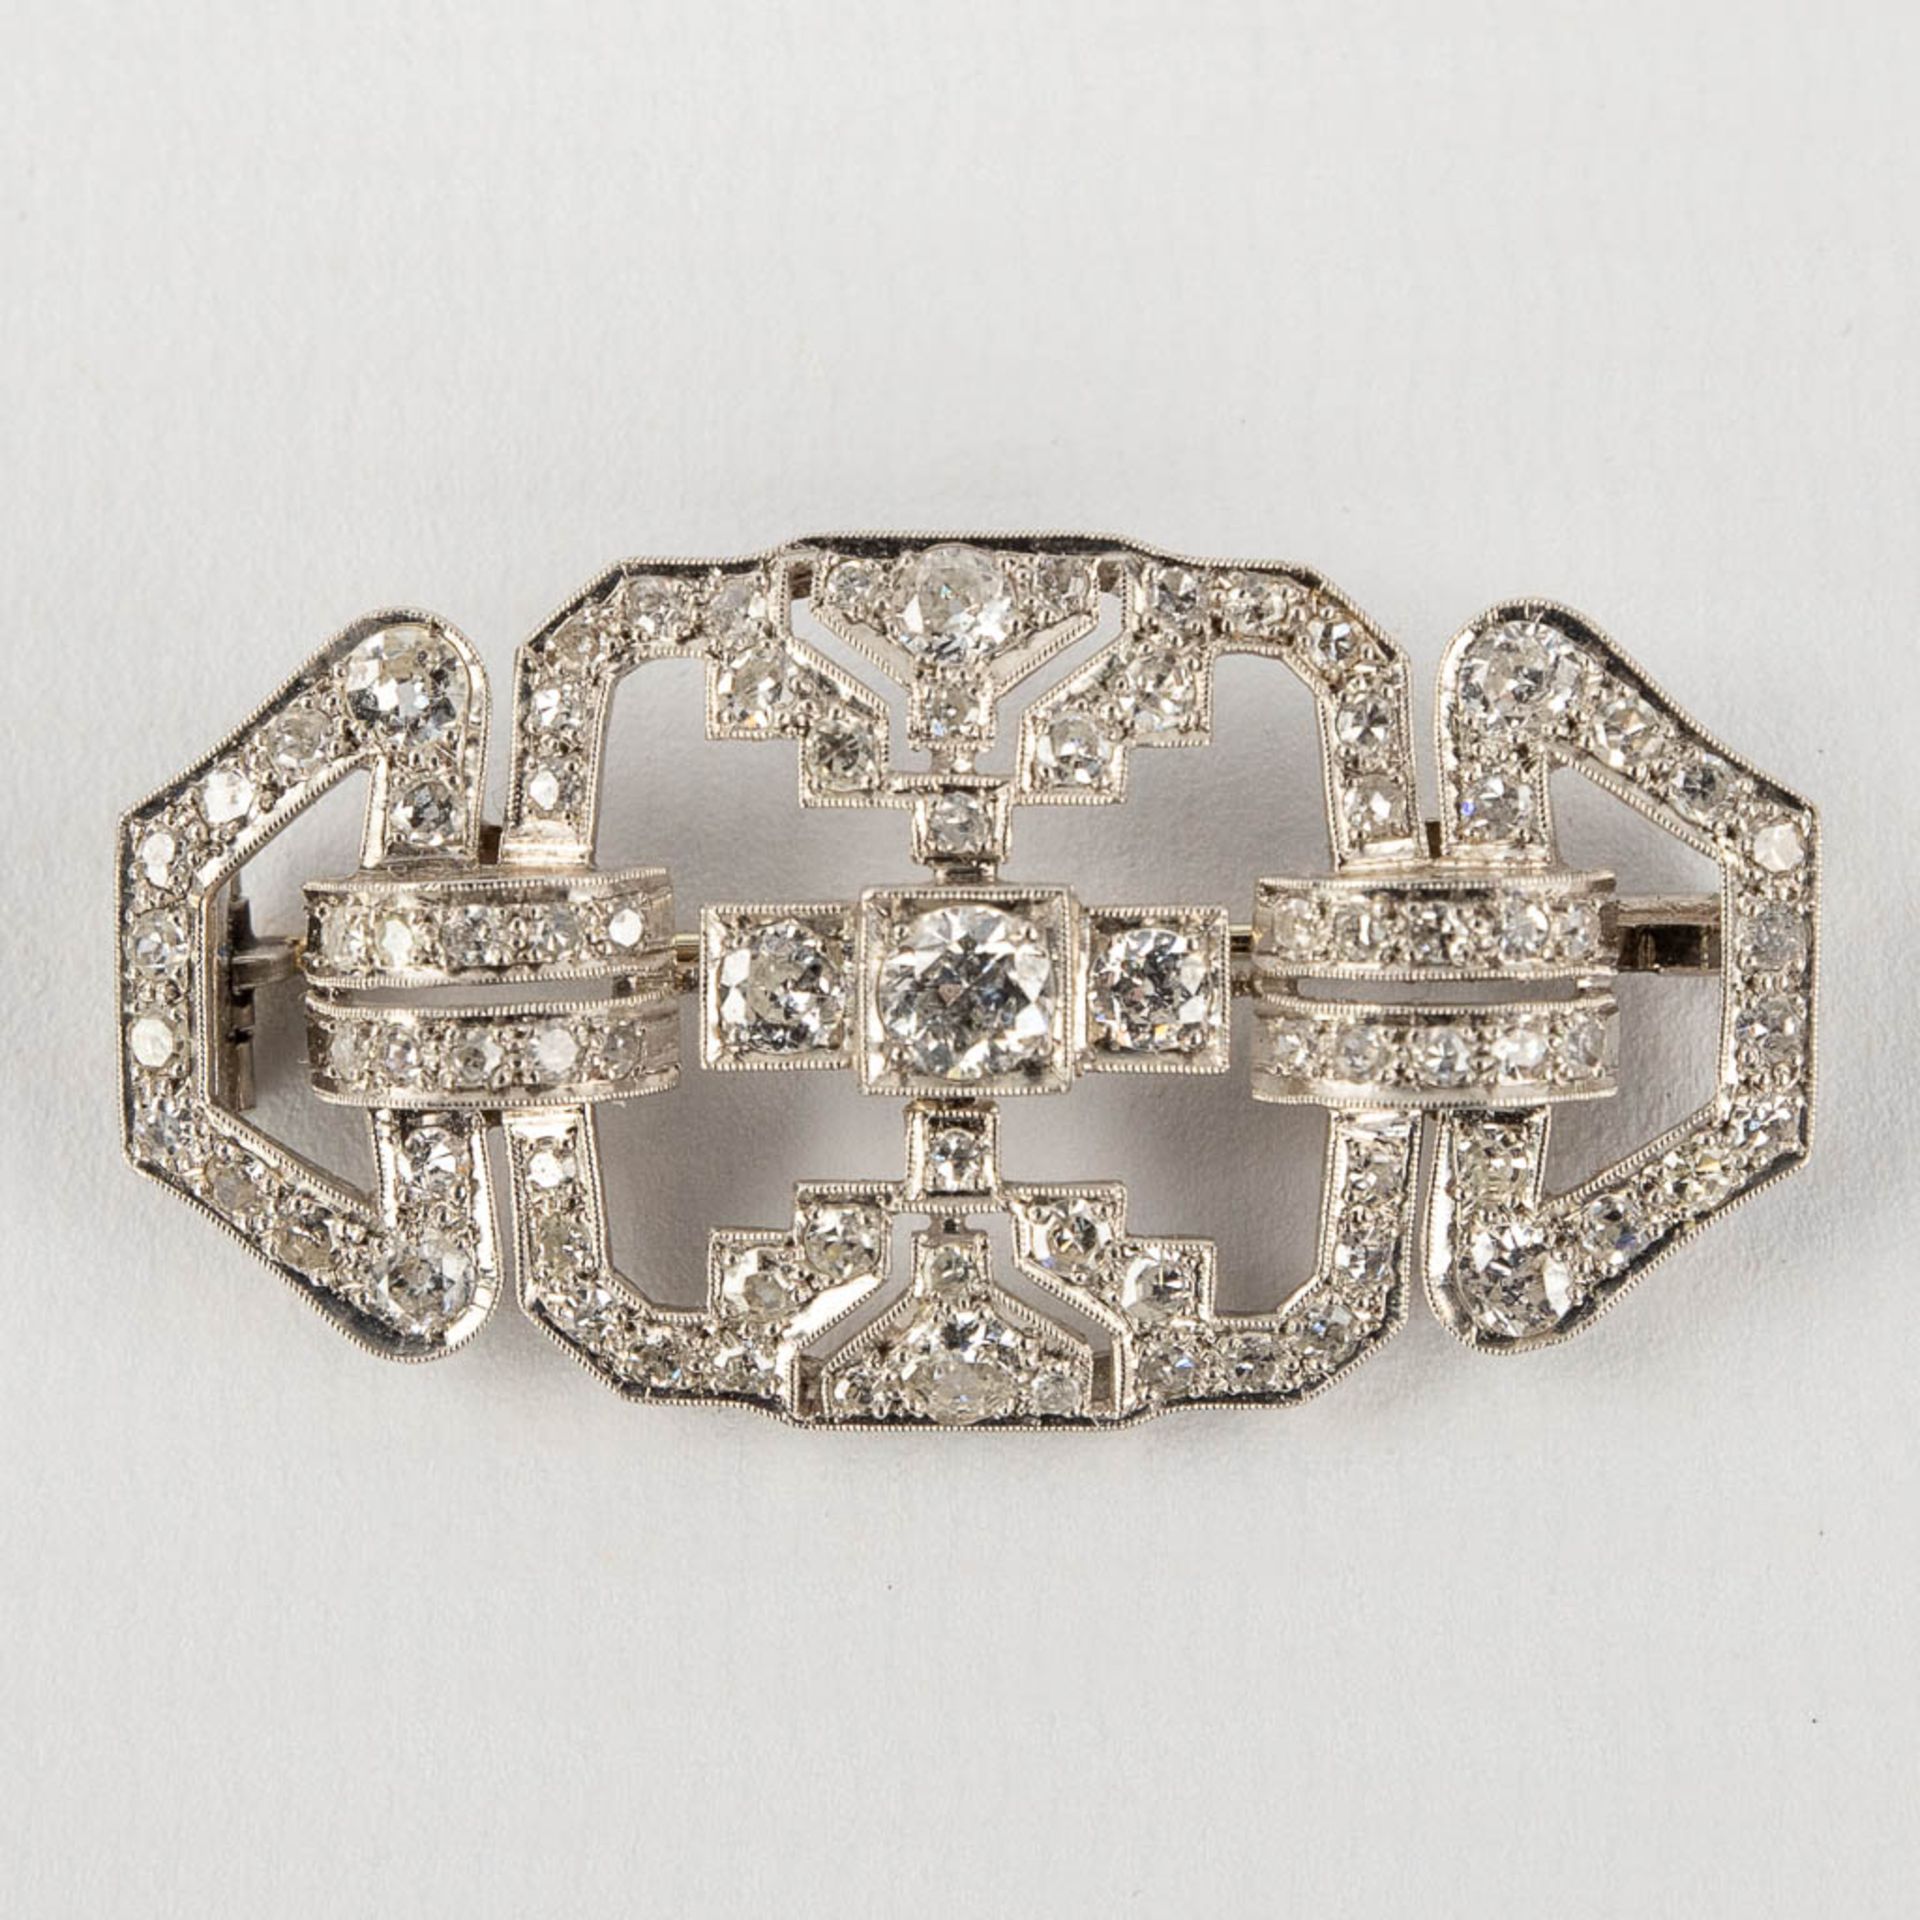 An antique Brooche, art deco style, platinum. Finished with 9 large and smaller brilliants. 13,78g. - Image 4 of 11